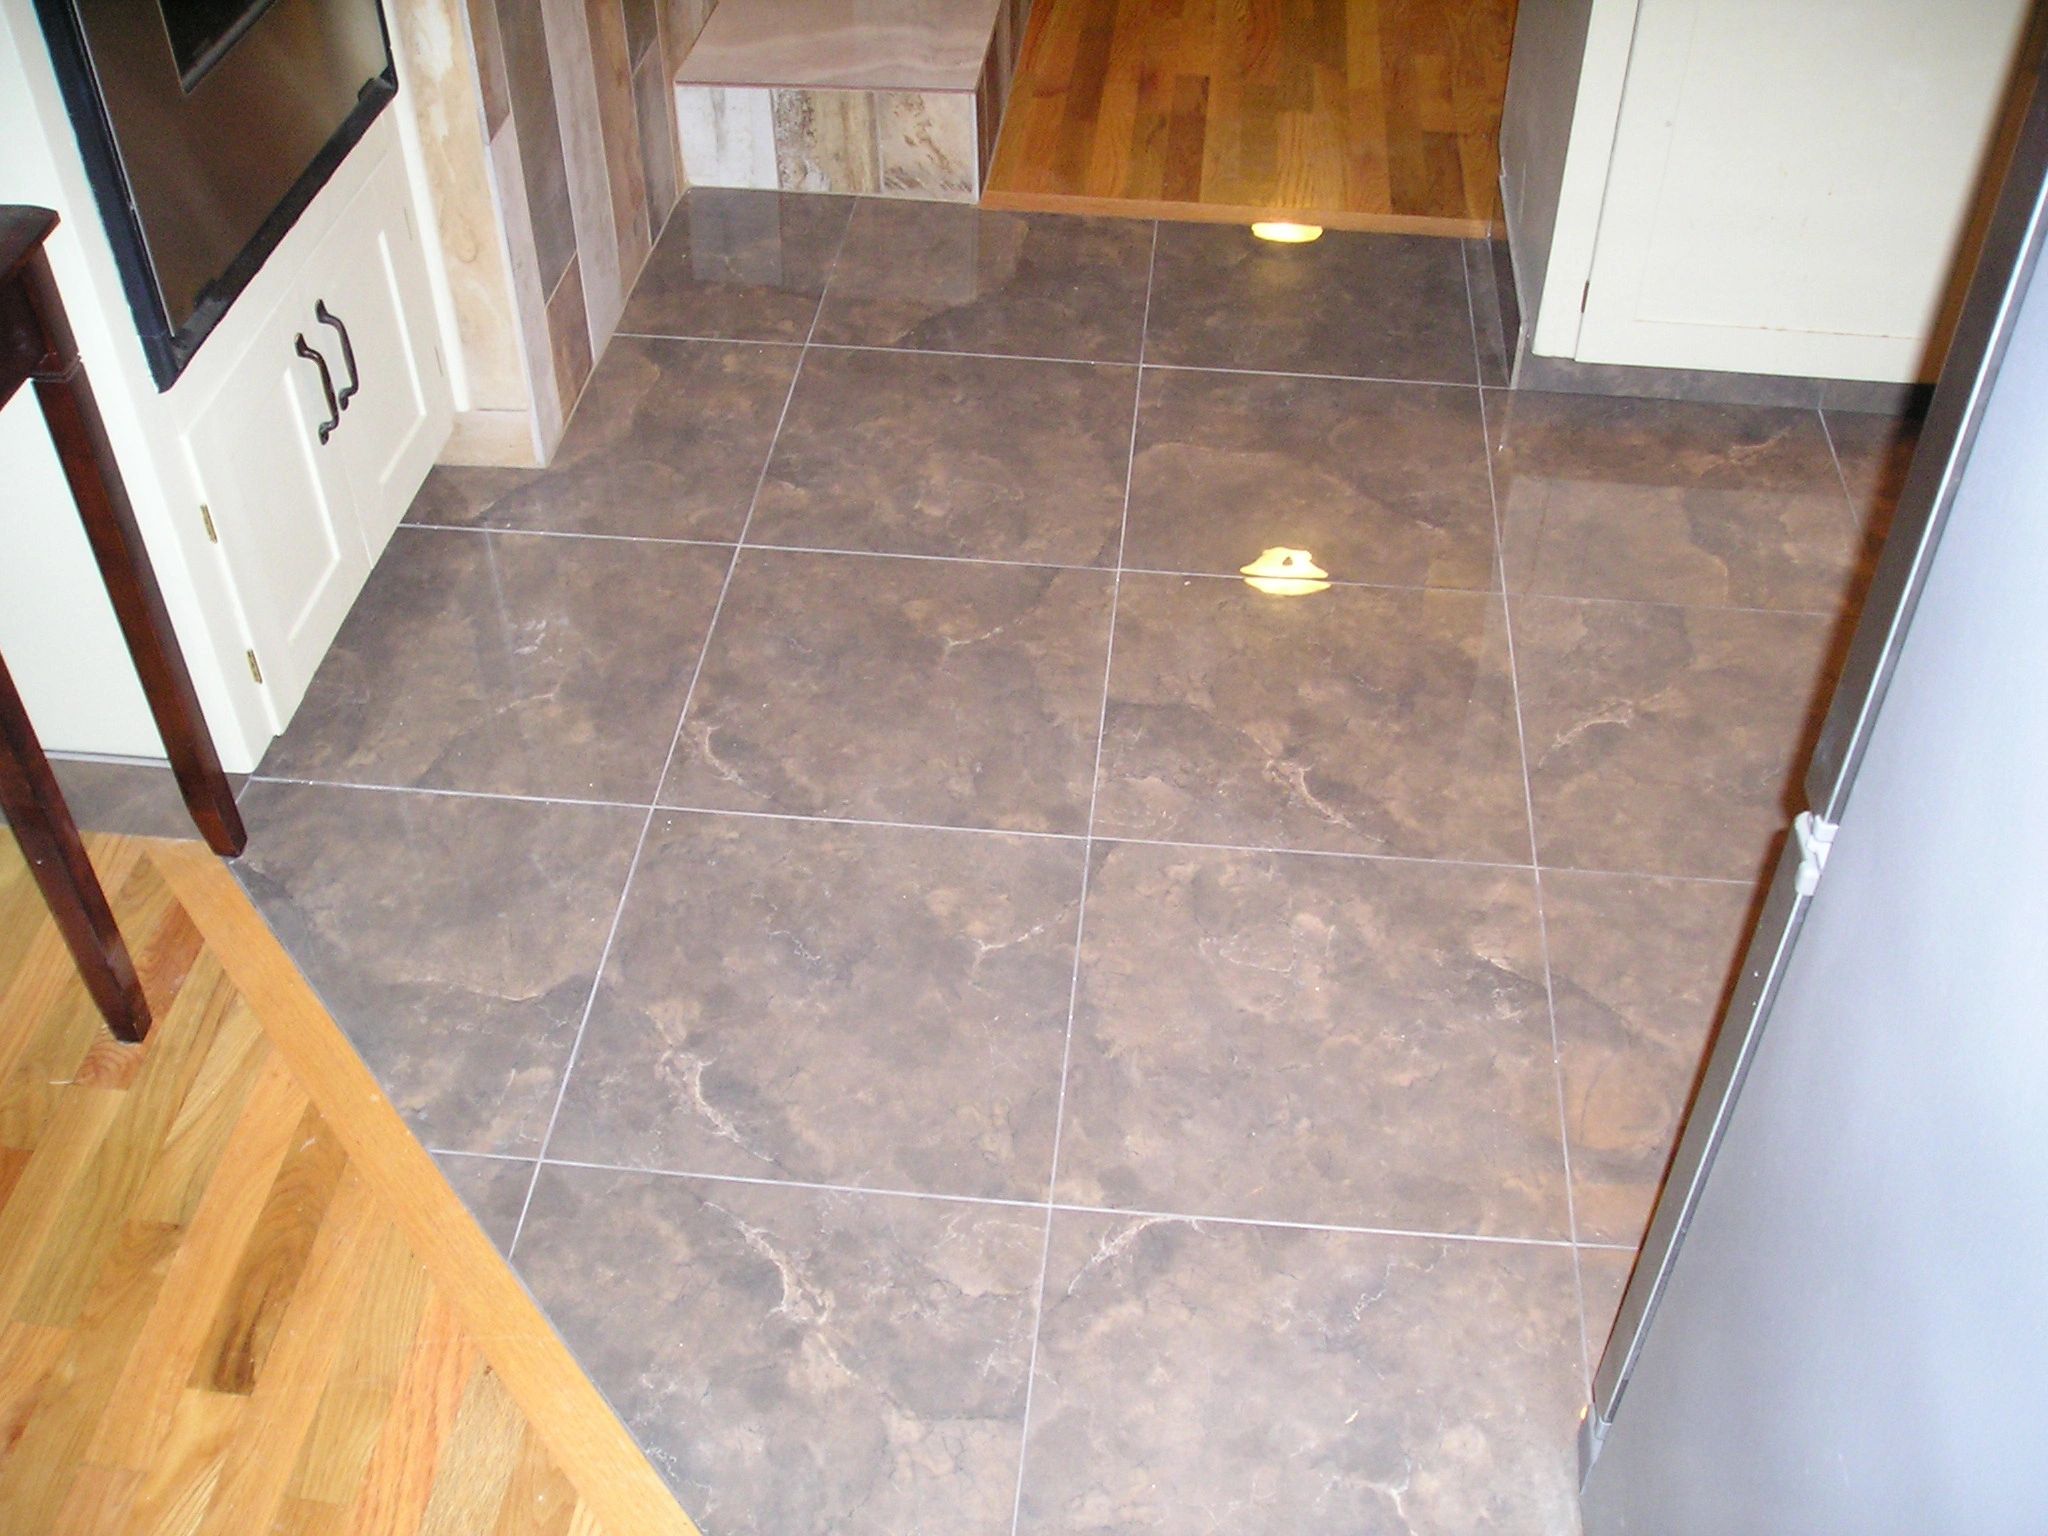 Heated tile floors are very welcoming to the feet.